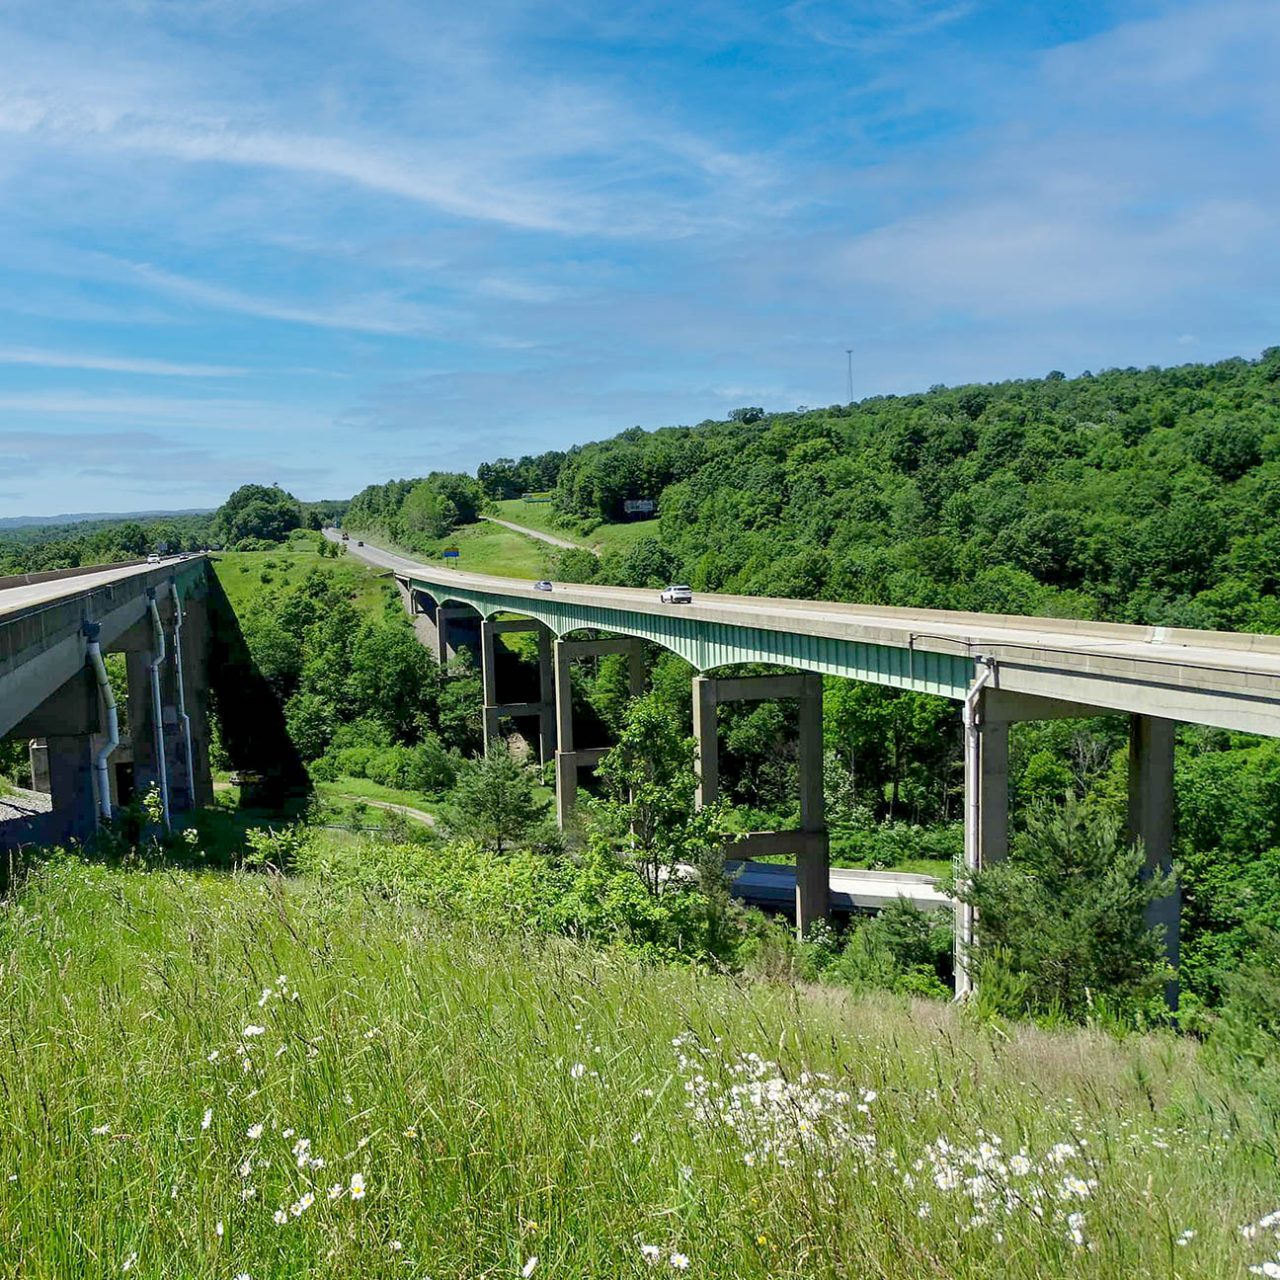 The I-80 Canoe Creek bridge is one of six bridges in critical need of rehabilitation that will be delivered in the first package of the Pennsylvania Department of Transportation’s Major Bridges P3 Program.  